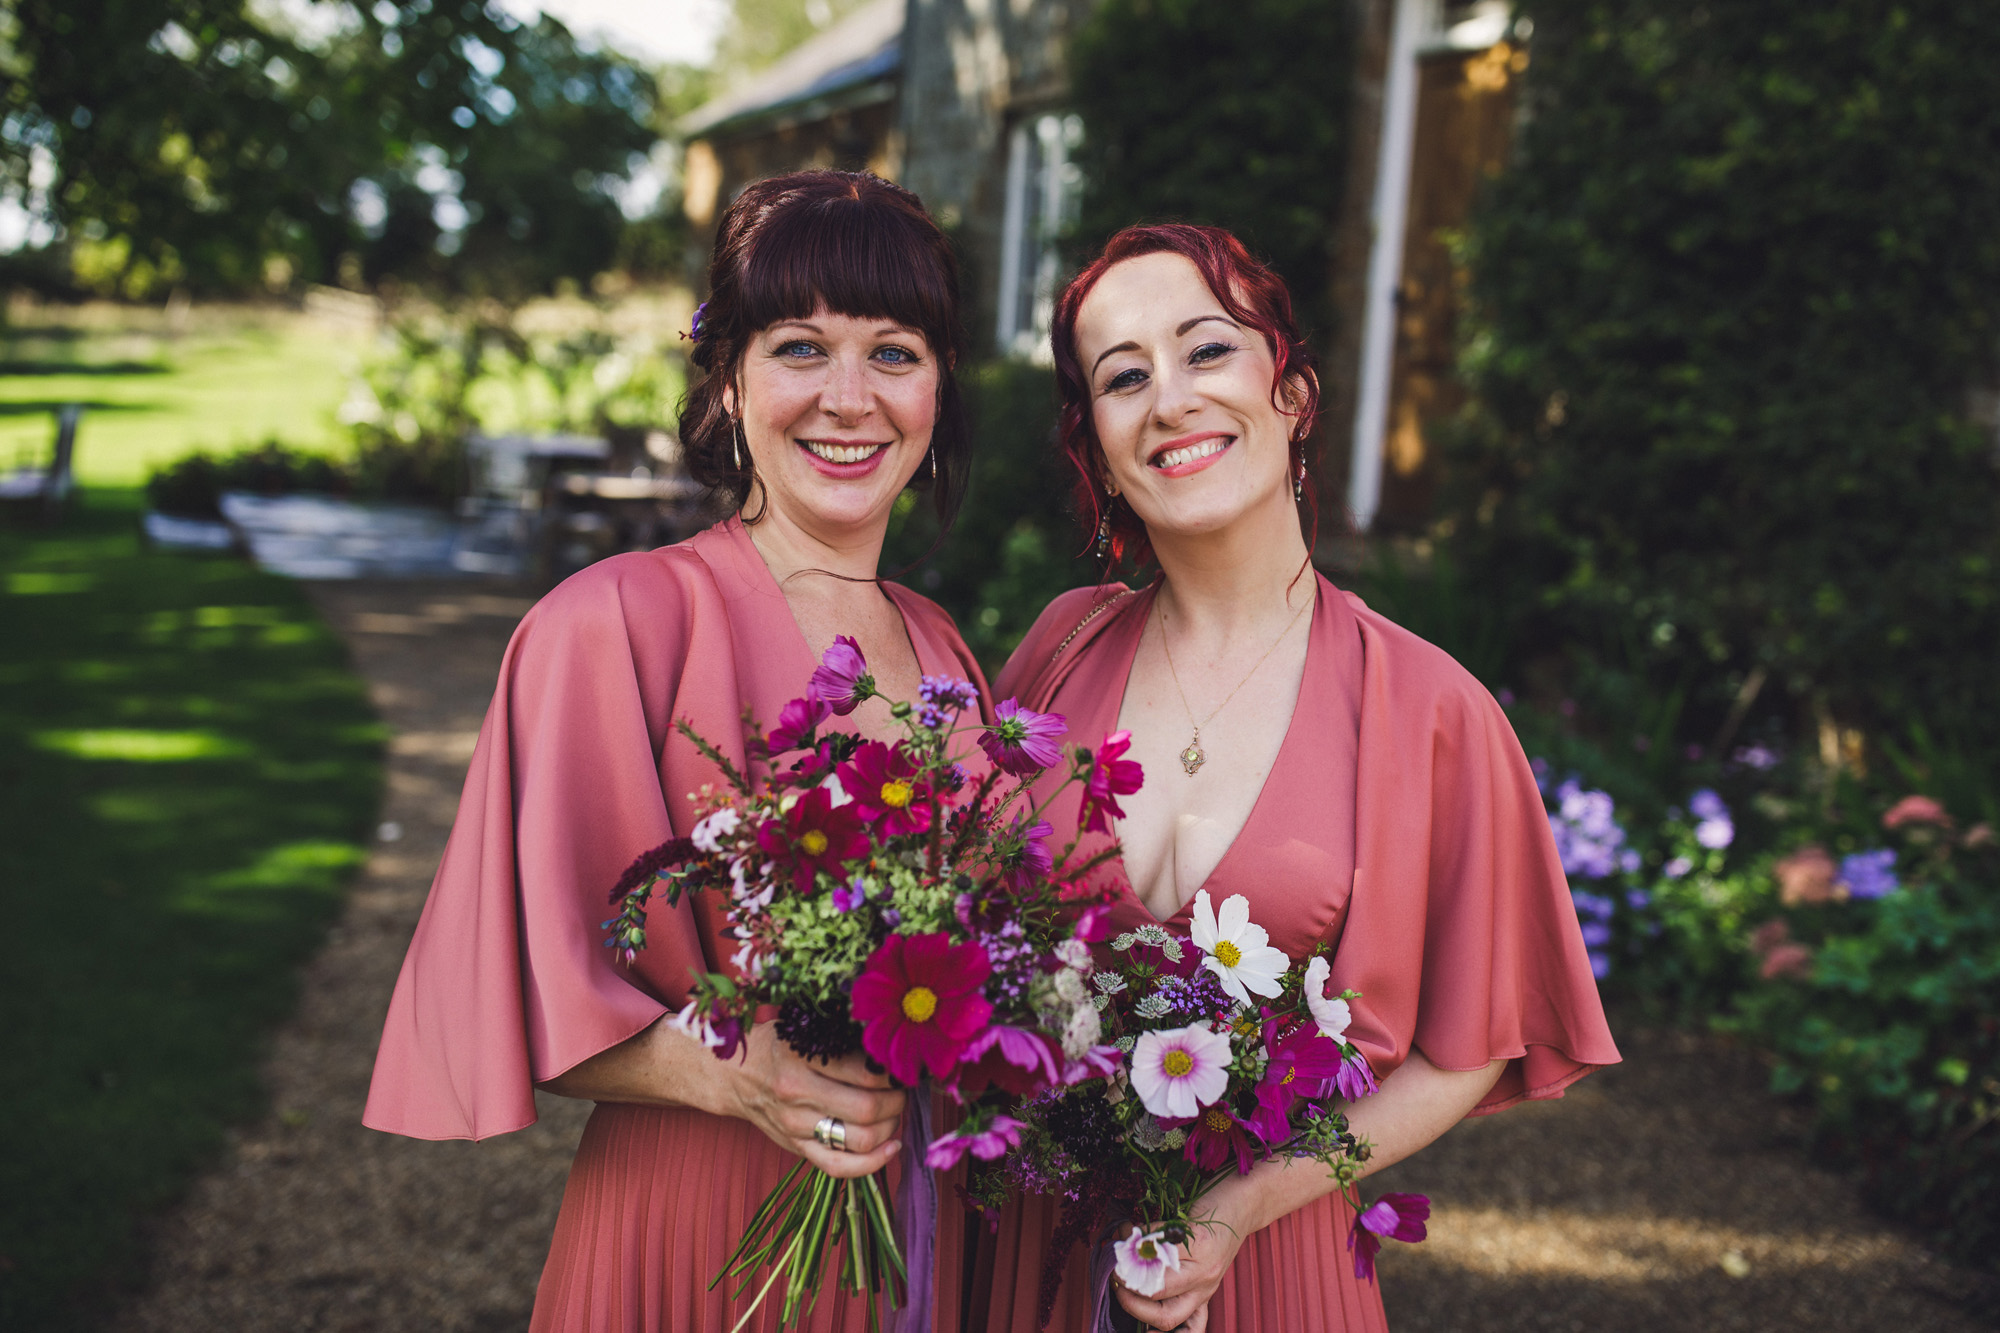 32 A 70s boho bride and her music inspired farm wedding